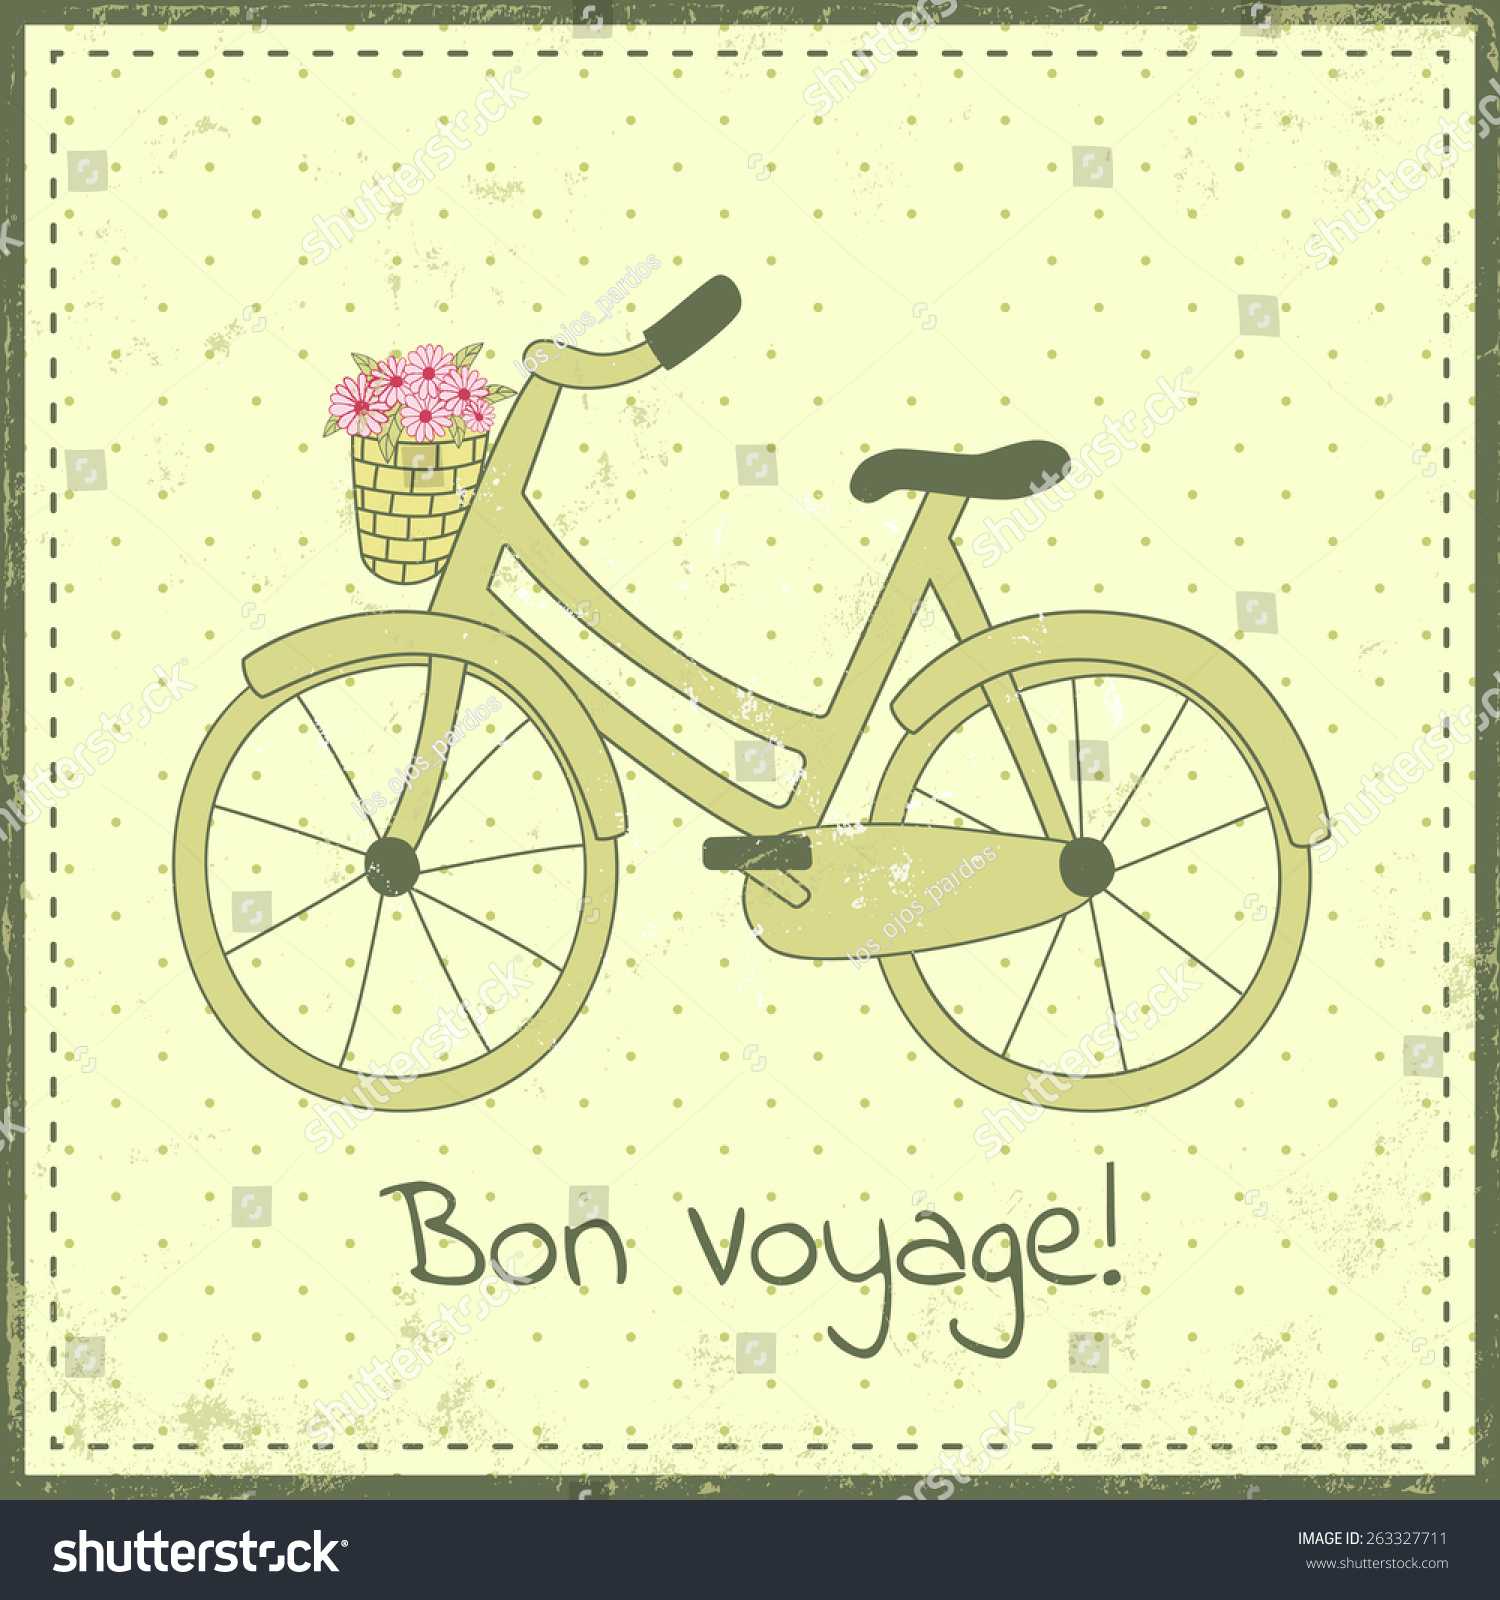 Greeting Card Template Bike Illustration Bon Stock Vector With Bon Voyage Card Template